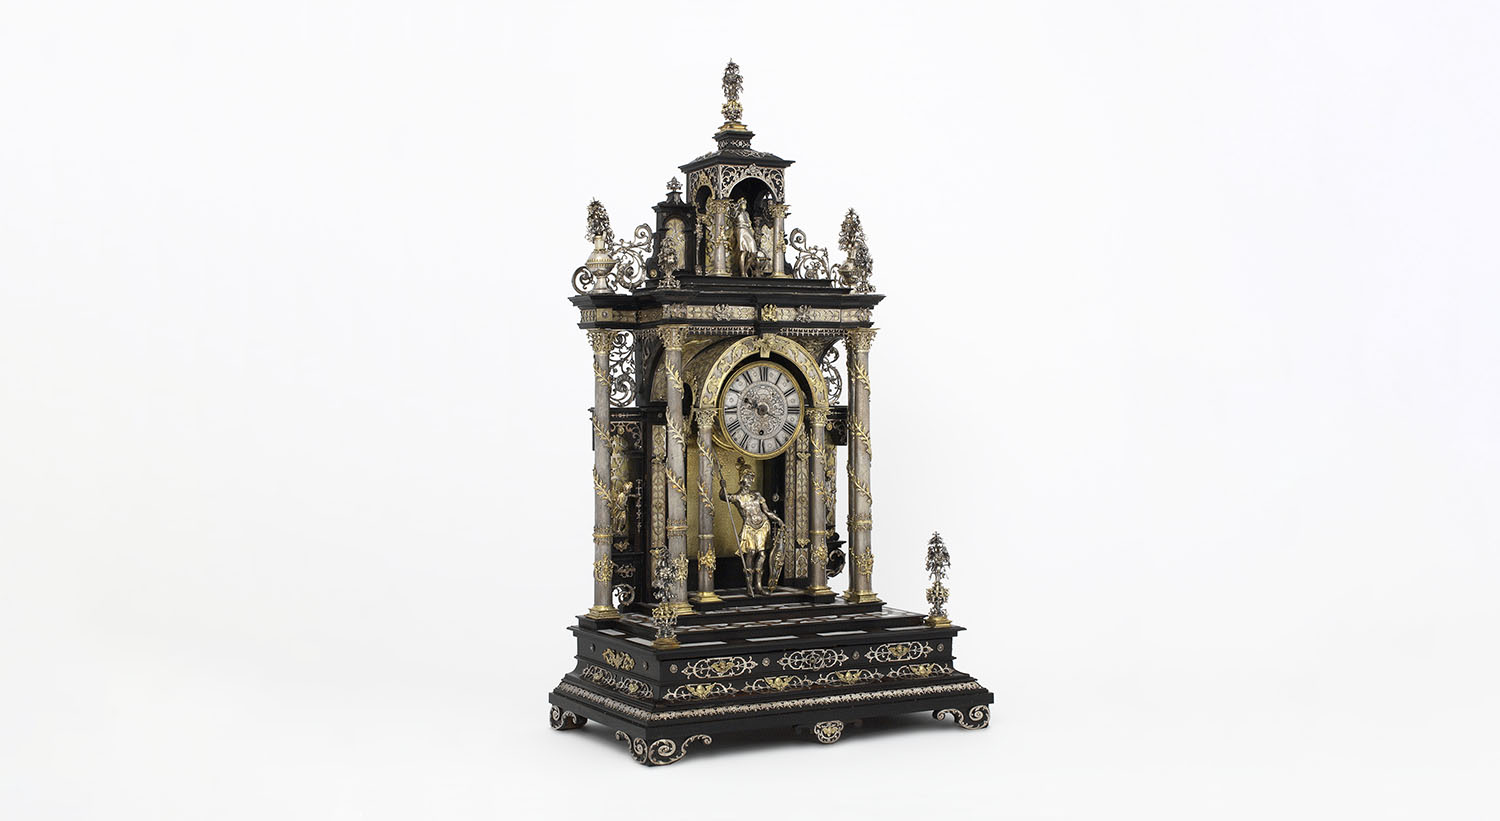 <p><b>Clock</b>, circa 1890<br>Makers: Elias Kreitmayer & Matthias Walbaum <br>Silver and gilded silver, ebonised wood, inlaid with mother-of-pearl and ivory, glass<br>(© The Rosalinde and Arthur Gilbert Collection on loan to the Victoria and Albert Museum. London.)</p>